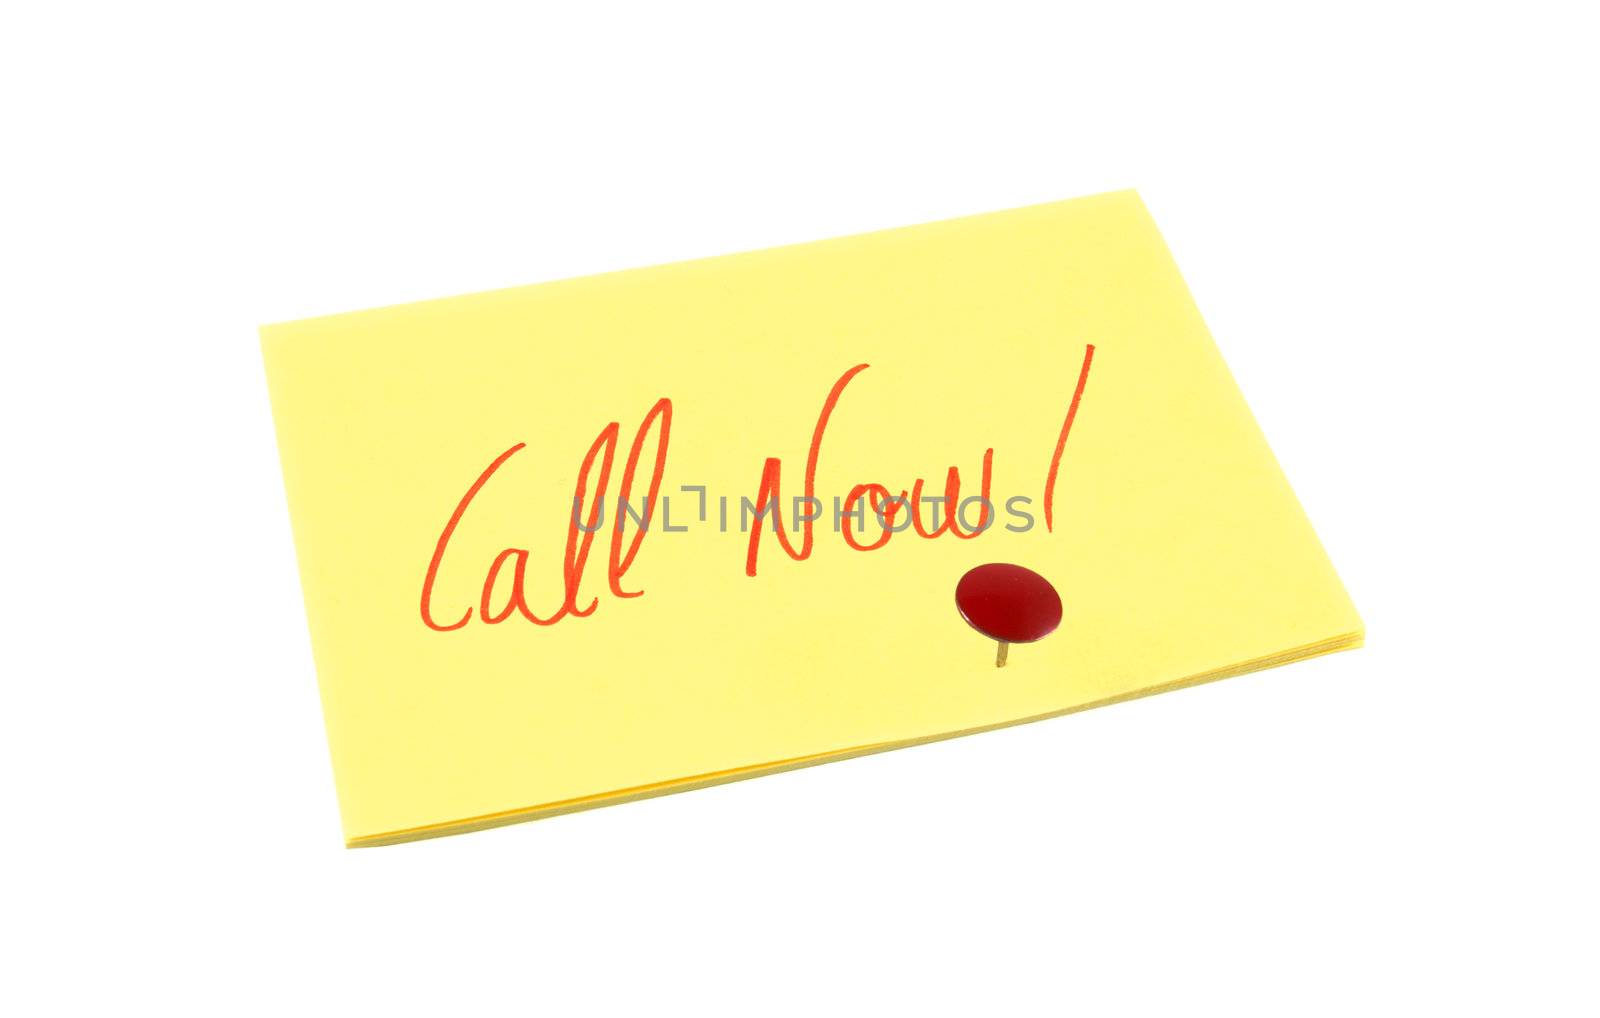 Call Now! reminder note over white isolated background